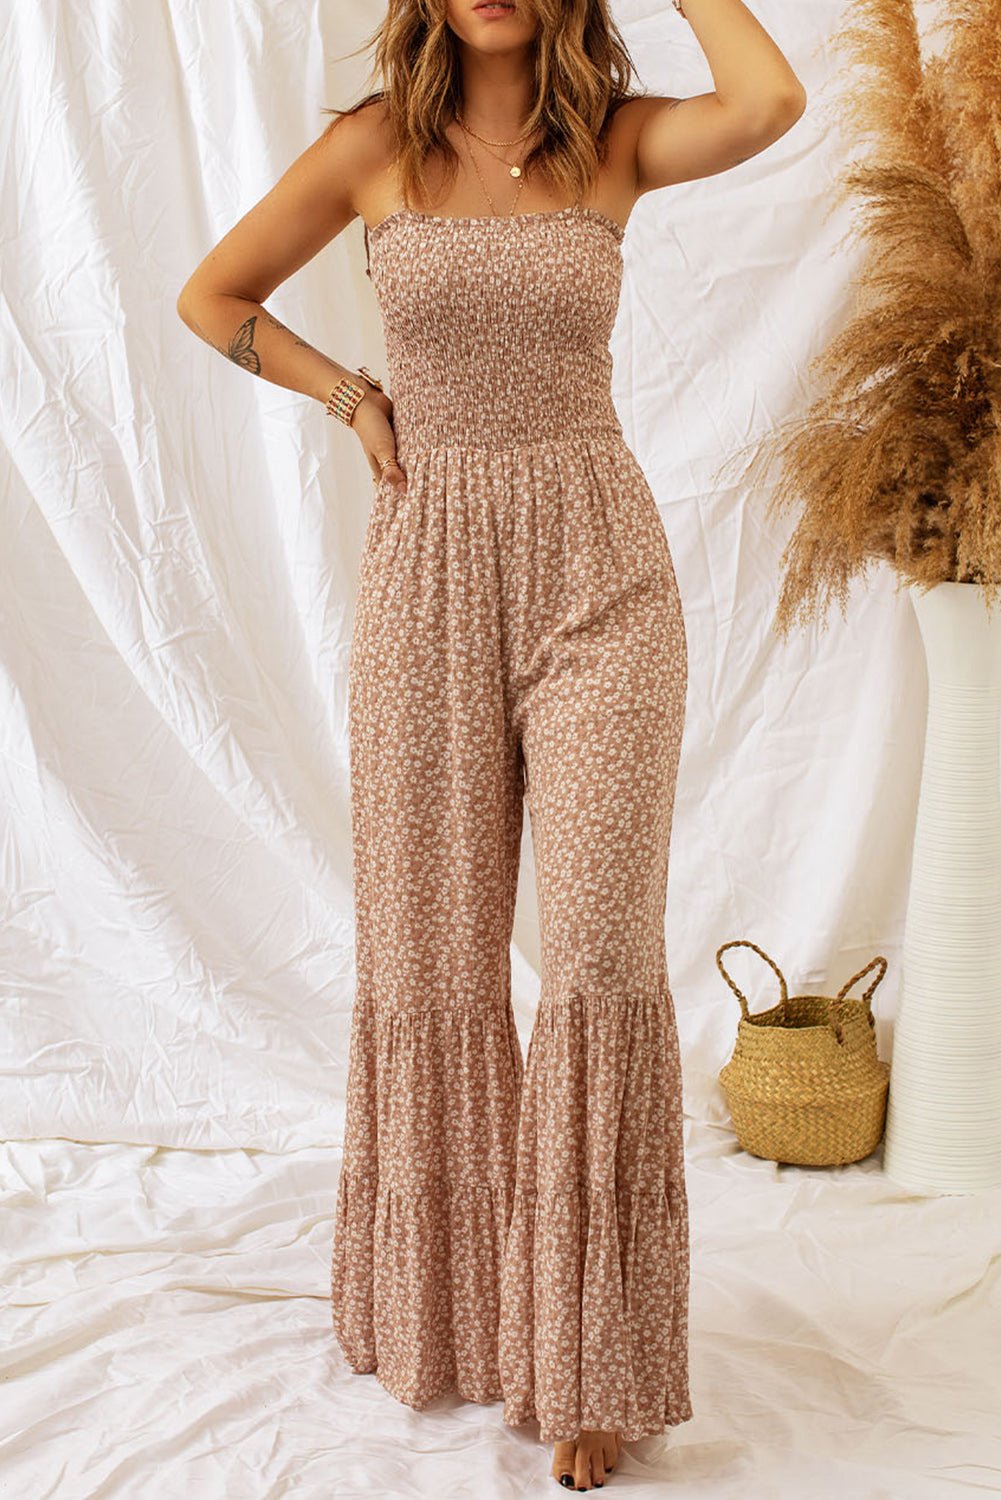 Floral Spaghetti Strap Smocked Wide Leg Jumpsuit - Fashion Girl Online Store